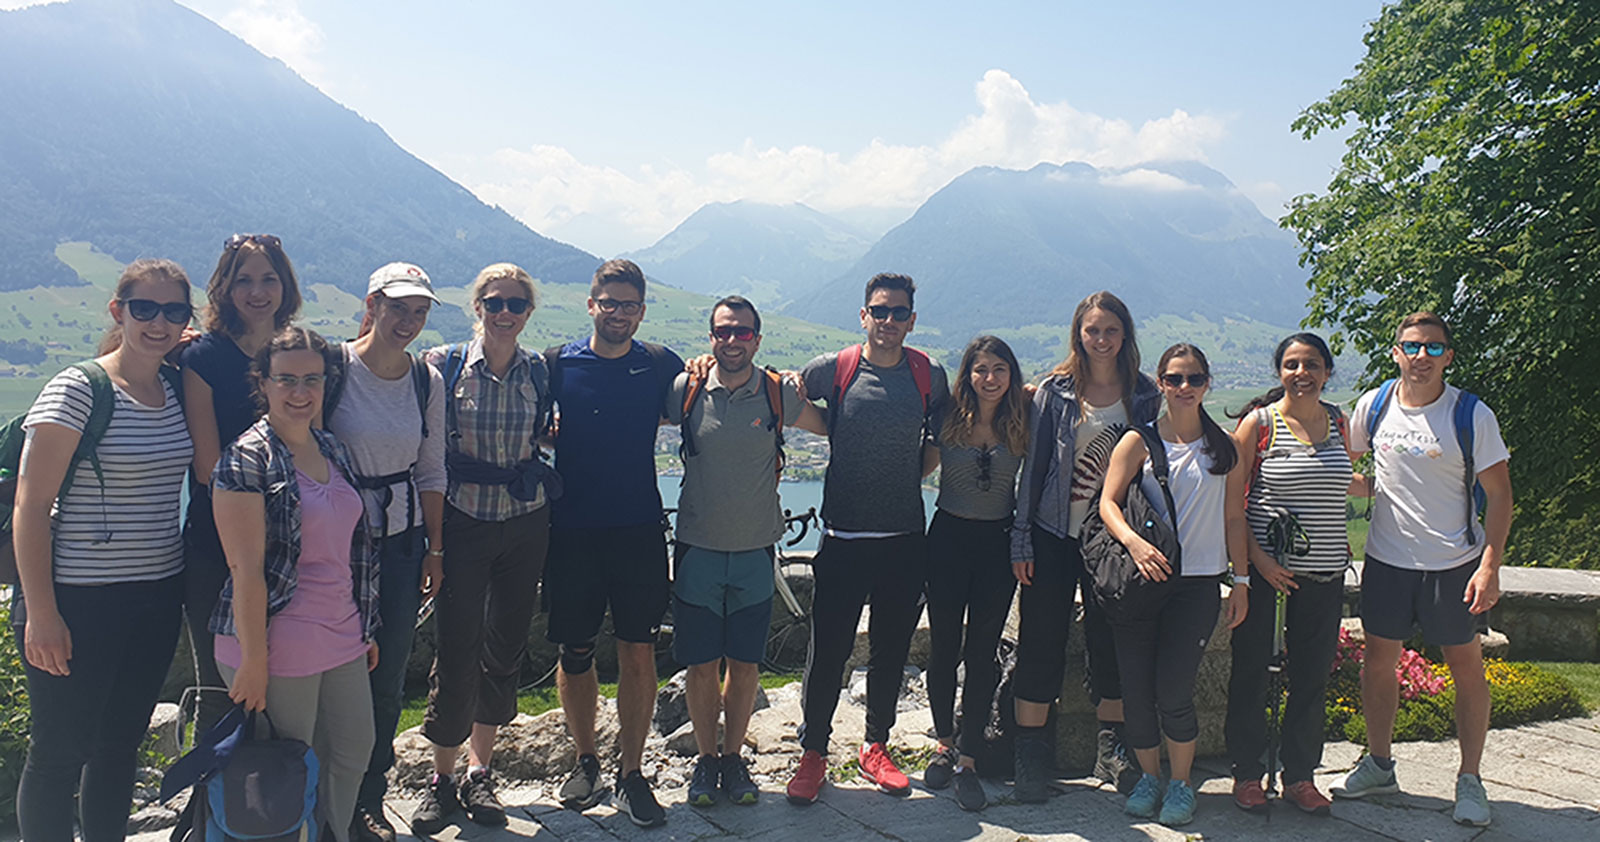 Enlarged view: Group excursion to Buergenstock, June 2019